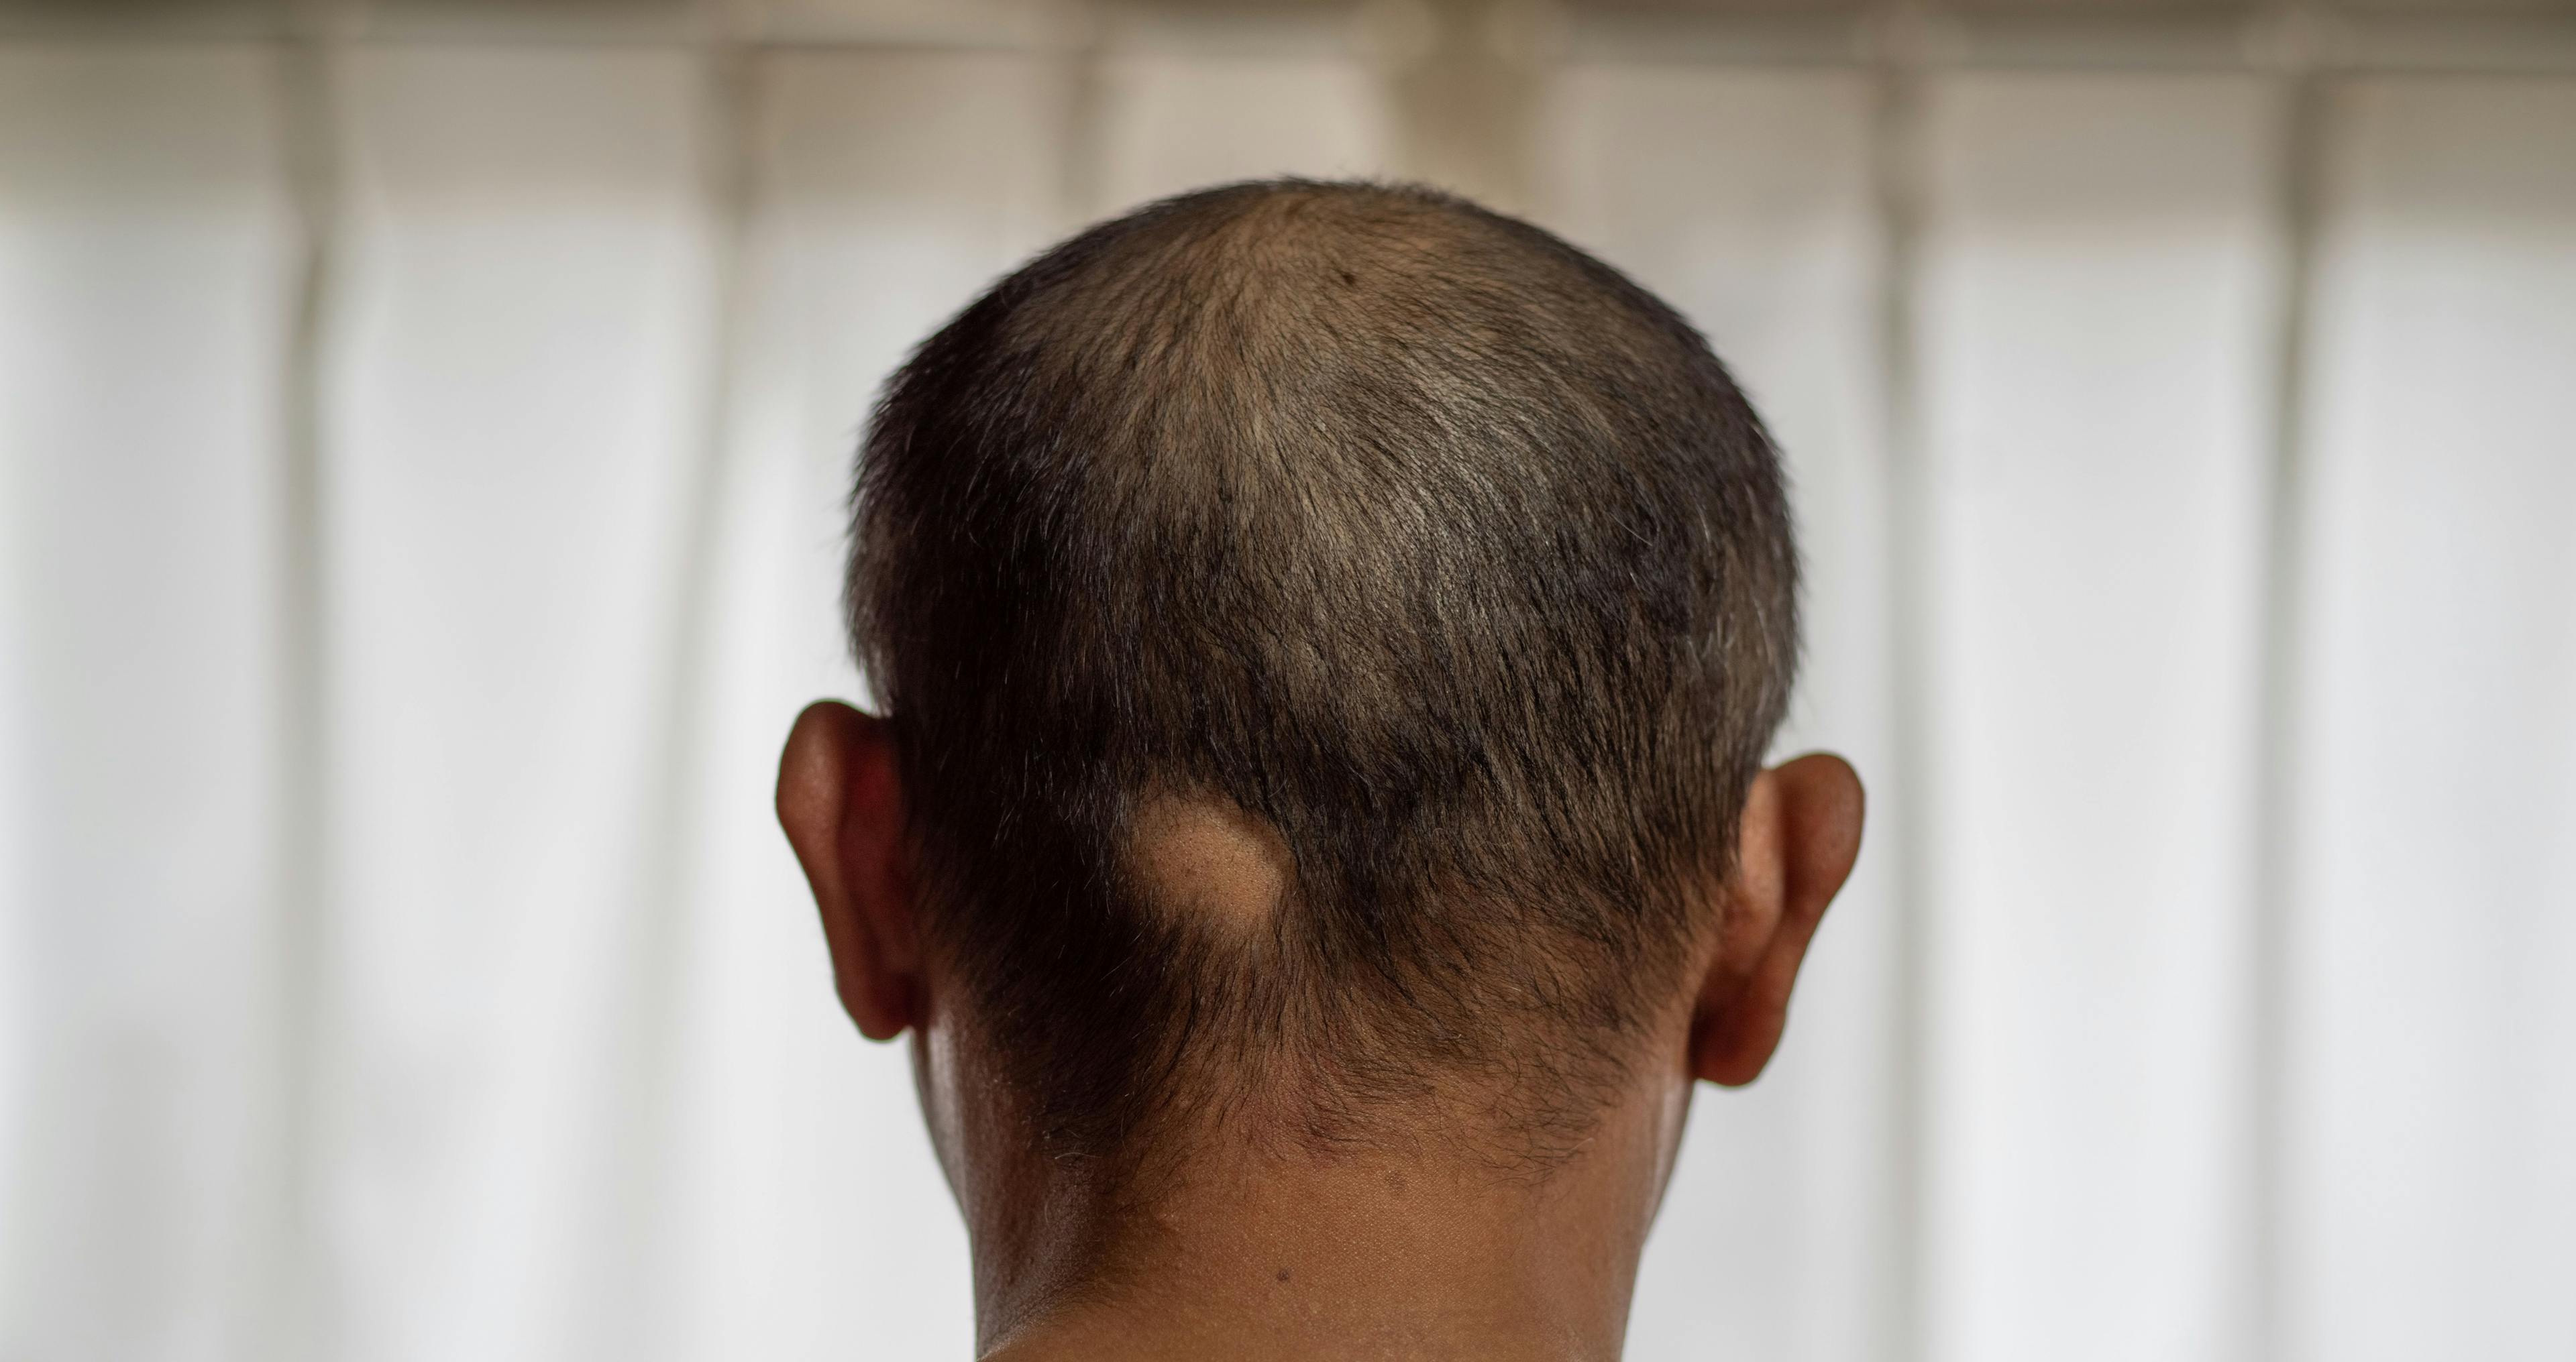 Man with alopecia located on the back of the head